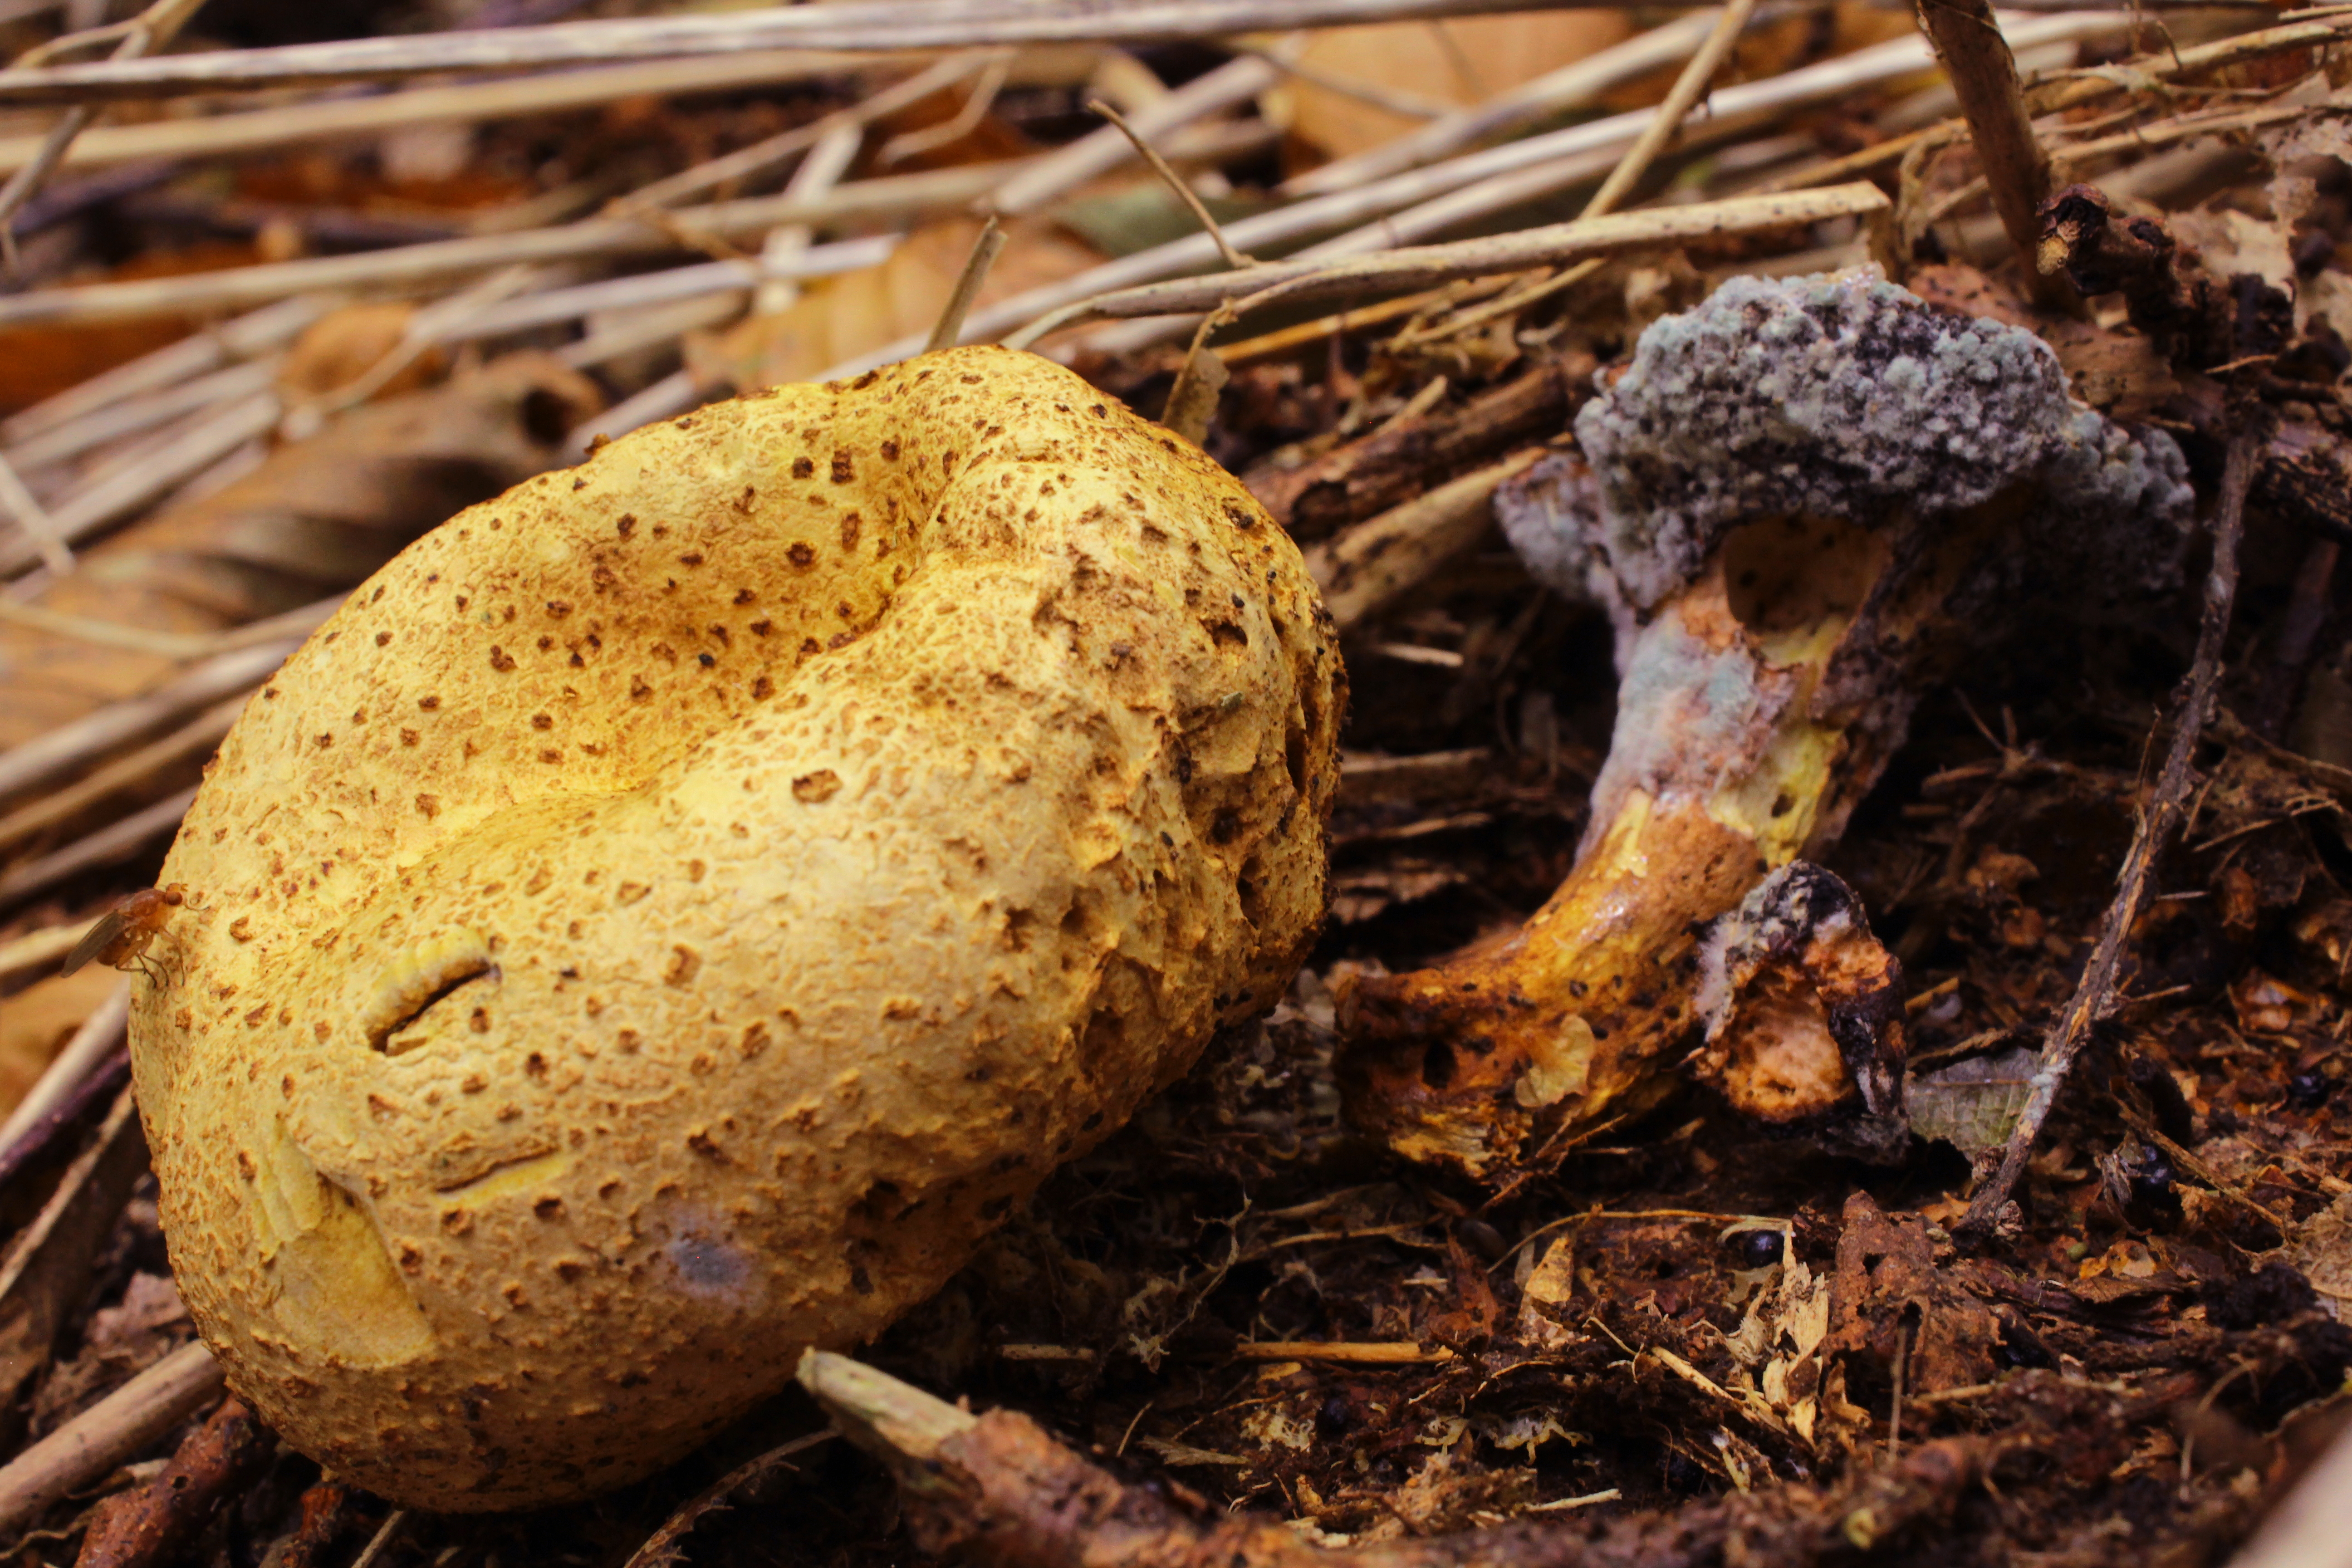 Common Earthball parasitised by a Parasitic Bolete that in turn is playing host to an unidentifiable fungal mould demonstrating the inter-relations of the fungi kingdom